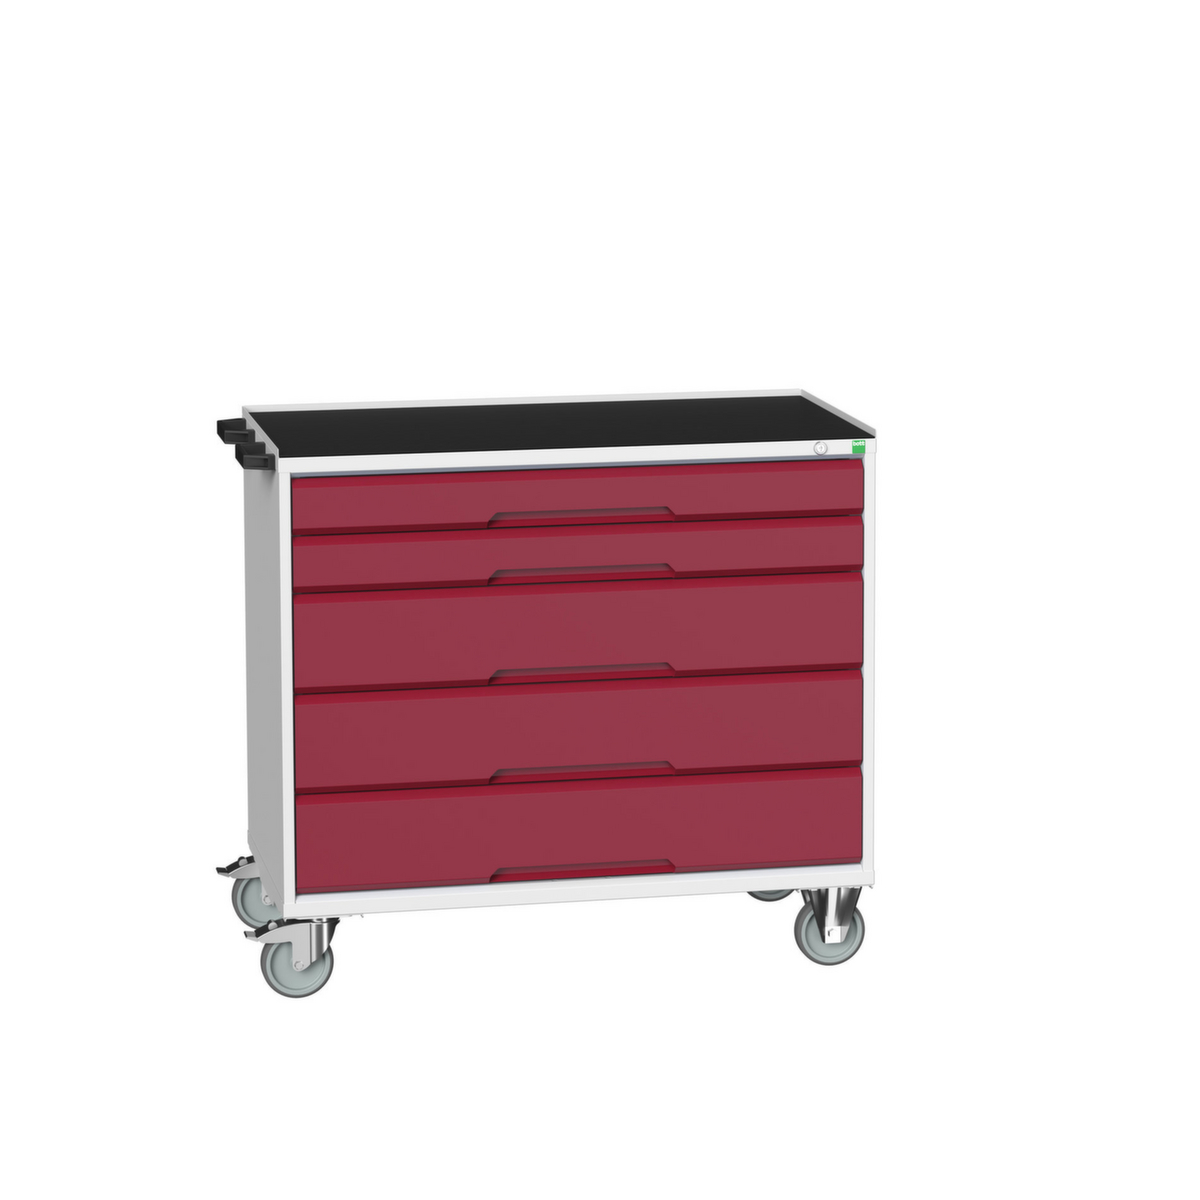 bott Chariot à outils verso, 5 tiroirs, RAL7035 gris clair/RAL3004 rouge pourpre  ZOOM